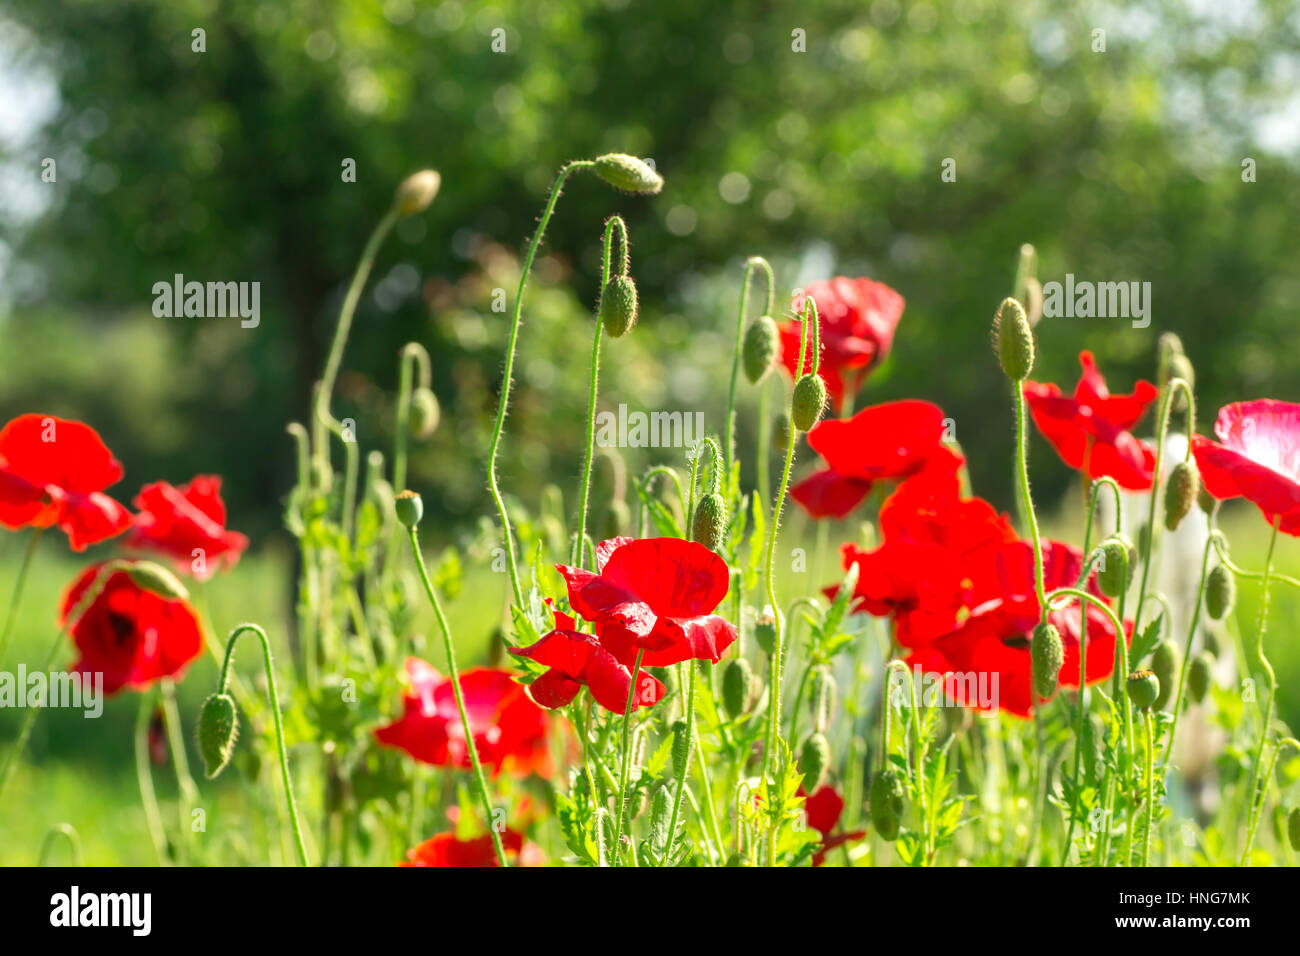 Flowering poppies. A field of poppies. Sunlight shines on plants. Red spring flowers. Gentle warm soft colors, blurred background Stock Photo